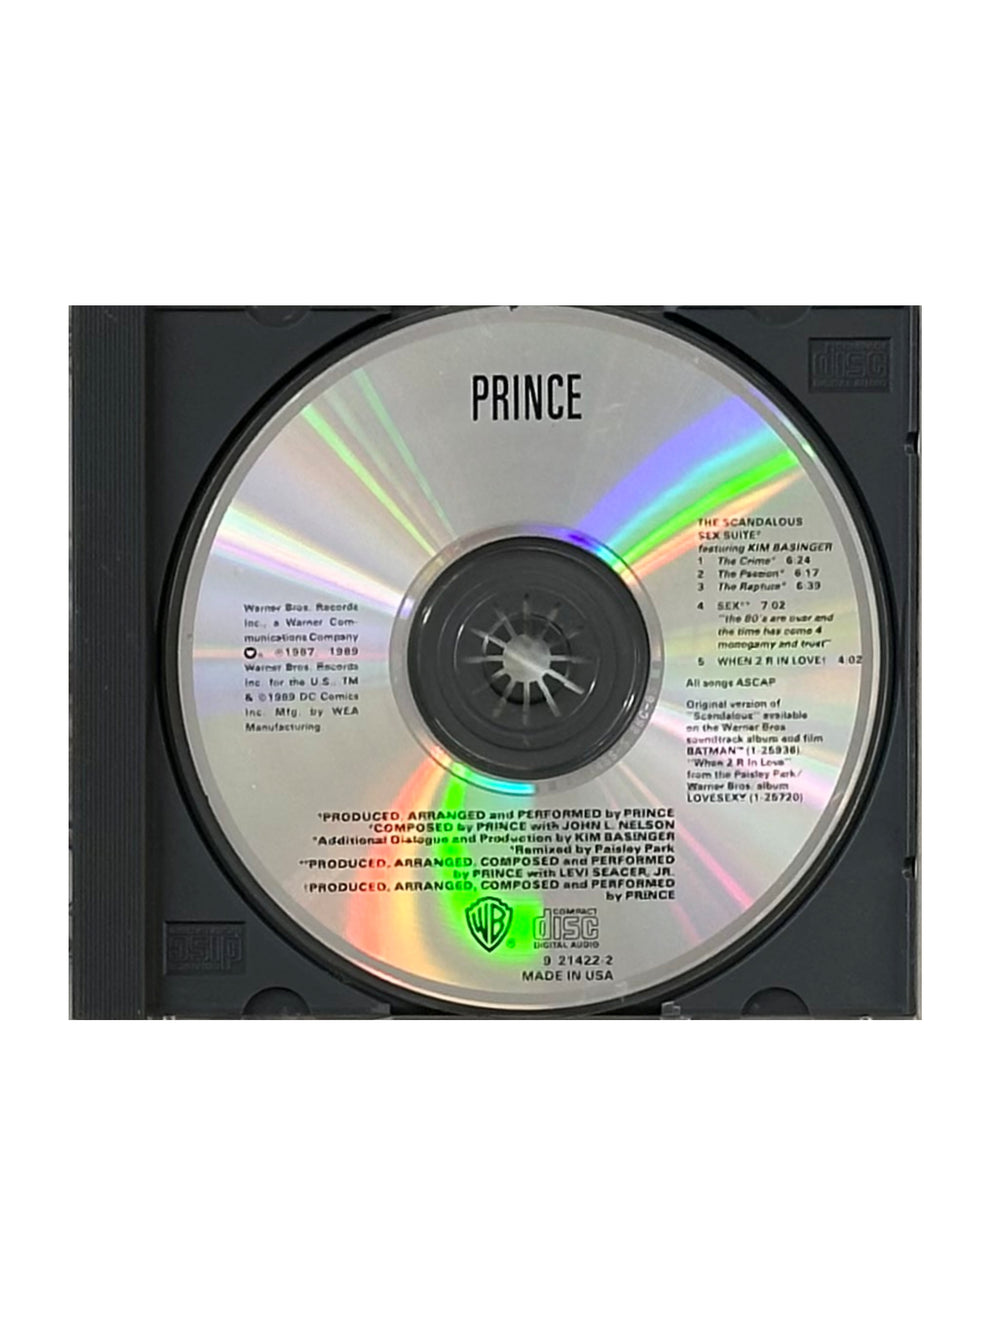 Prince - The Scandalous Sex Suite CD Single Maxi US 31 Minutes Preloved: 1989